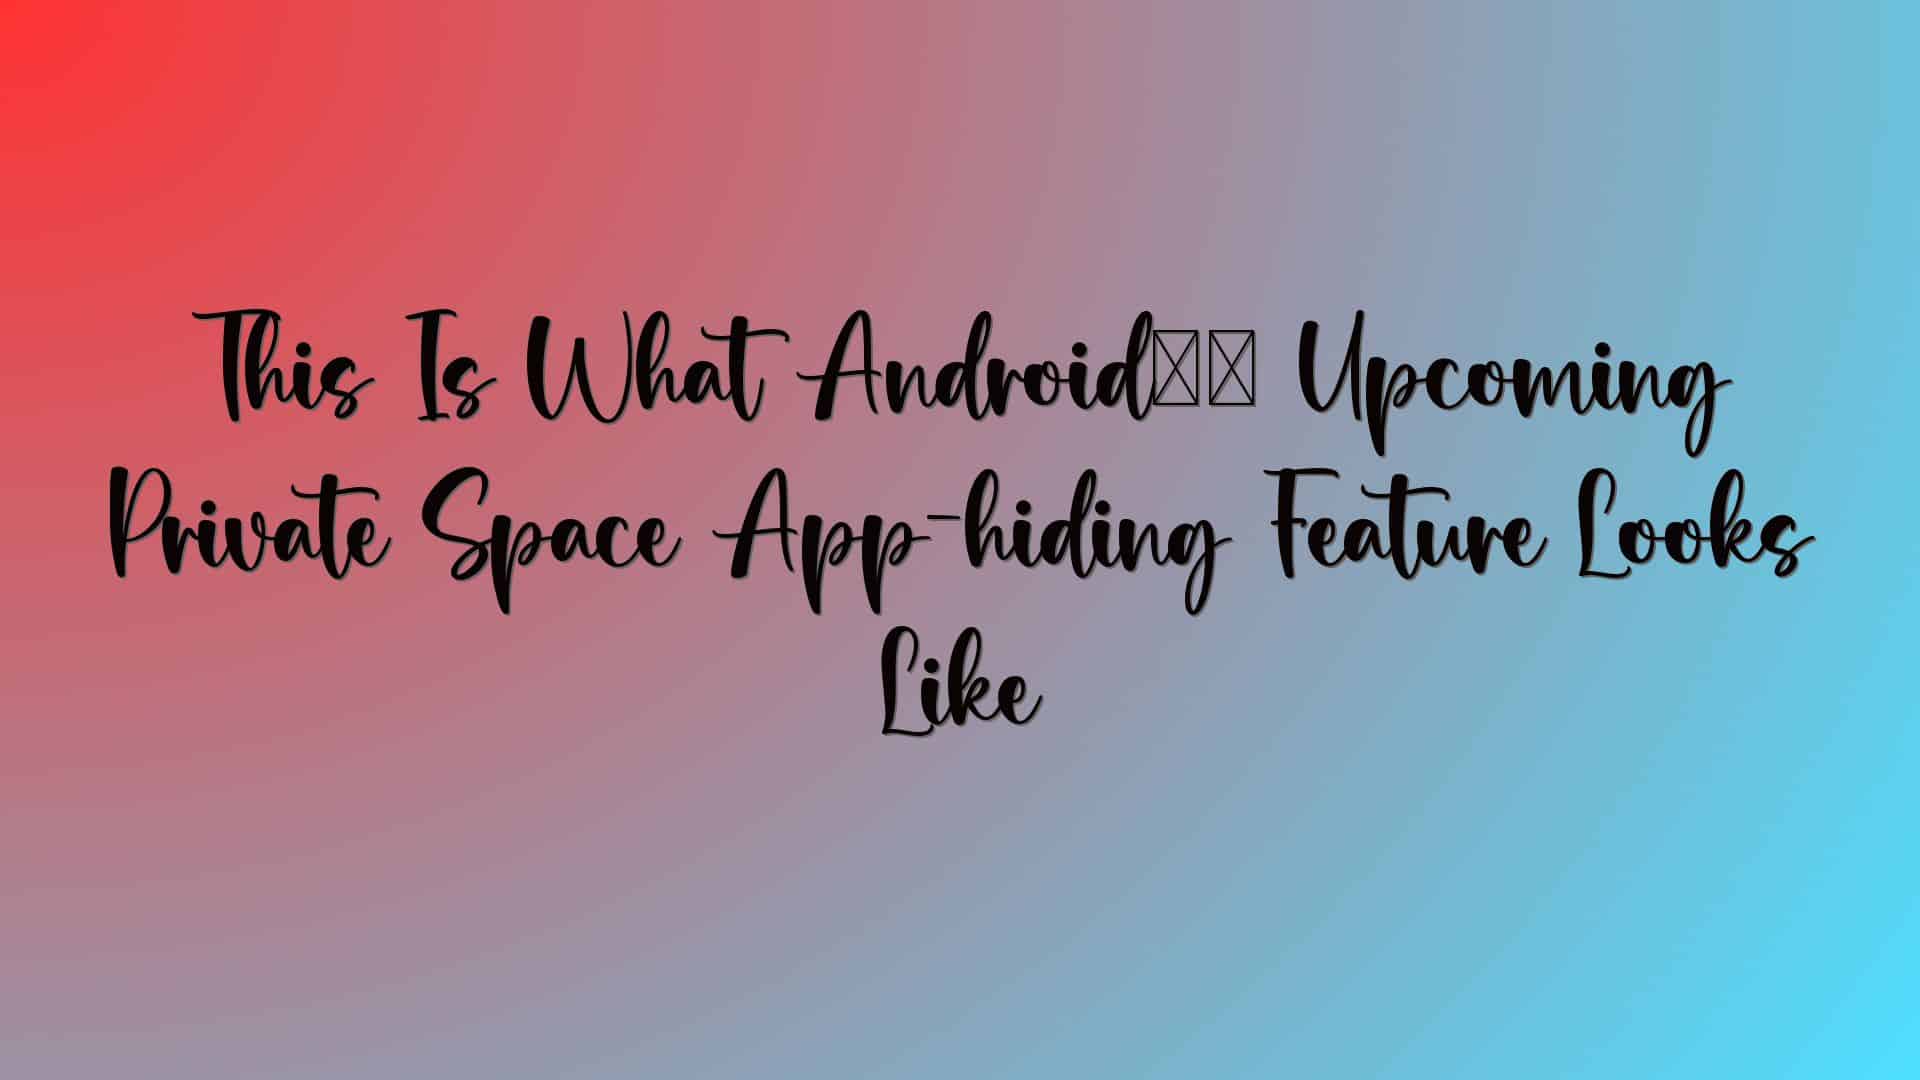 This Is What Android’s Upcoming Private Space App-hiding Feature Looks Like